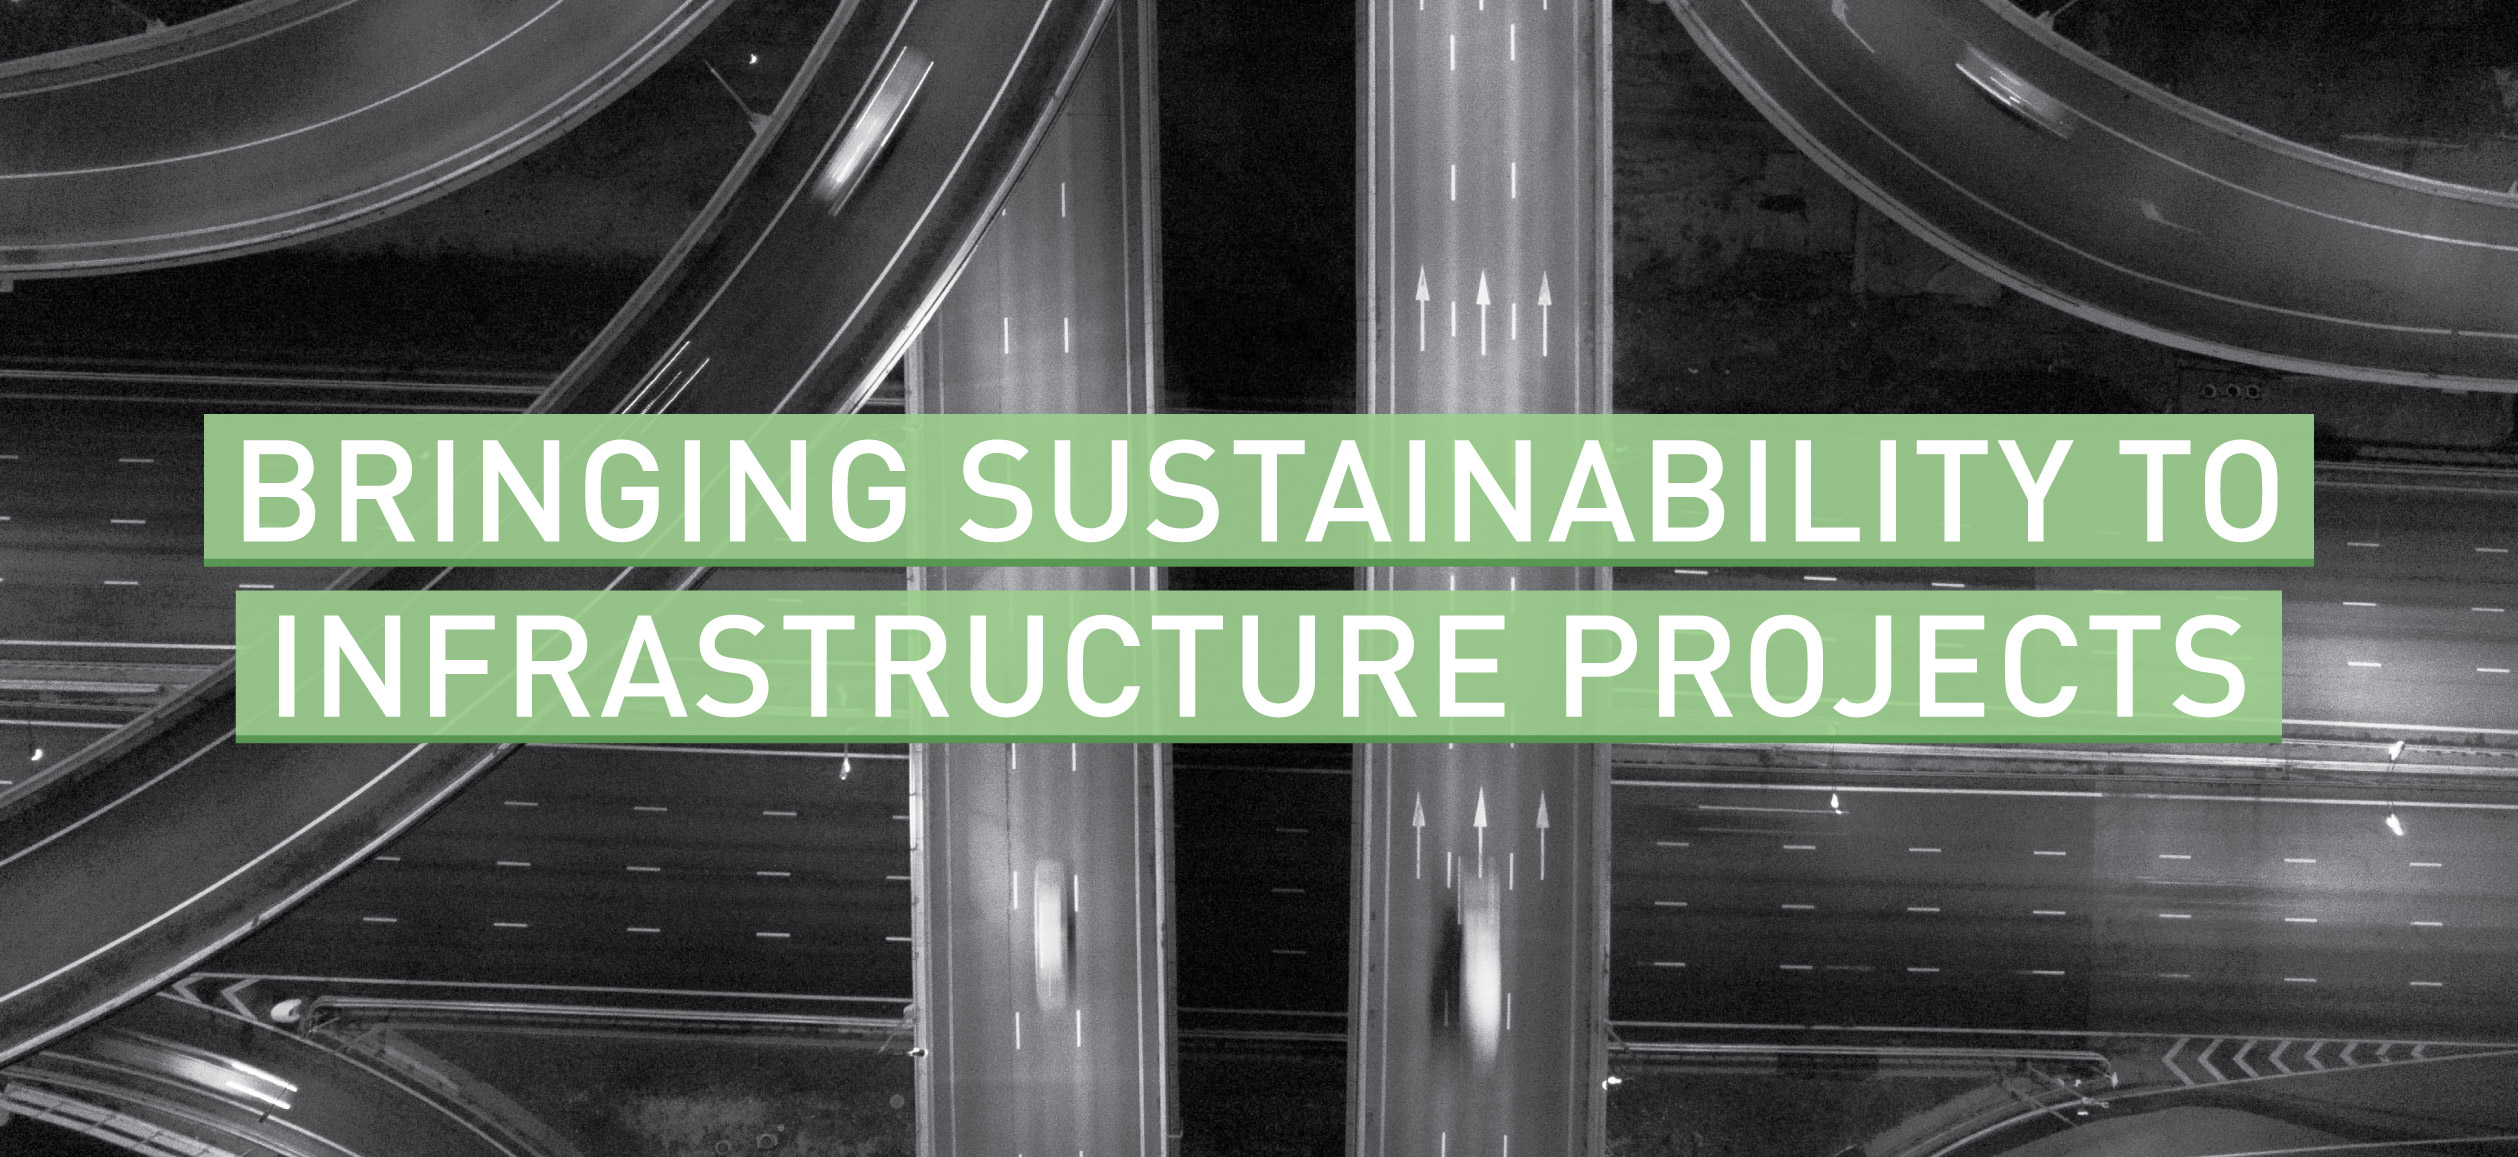 122021 Bringing Sustainability to Infrastructure Projects_Hero